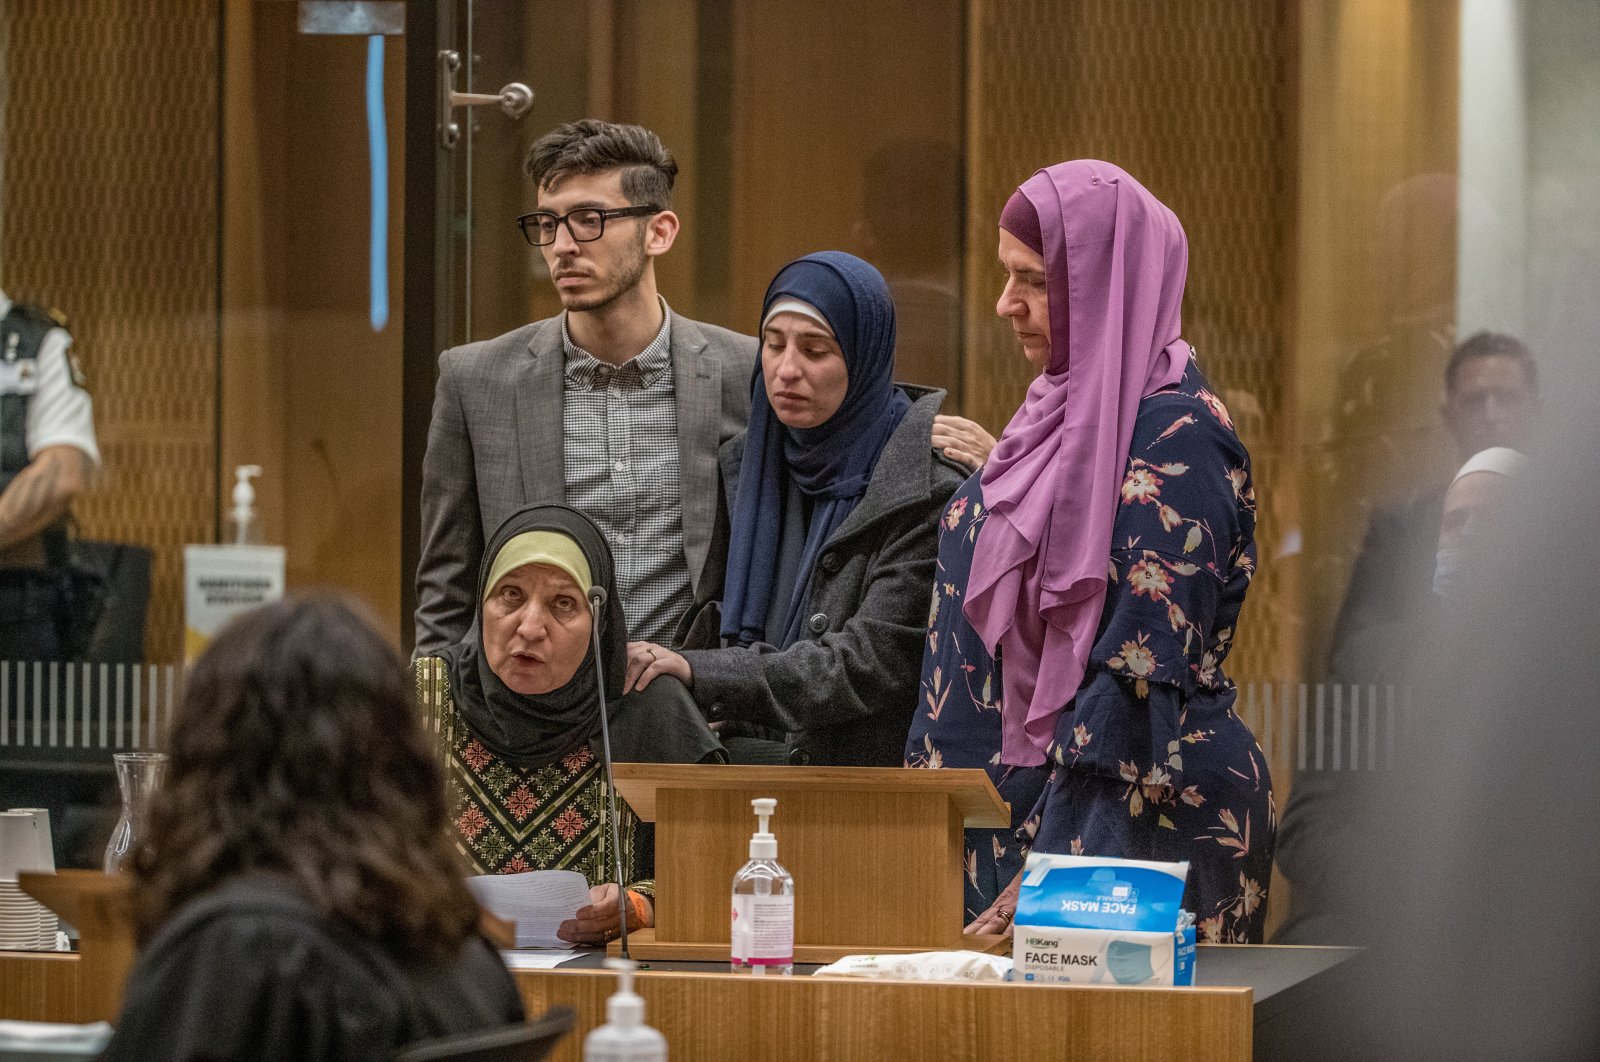 Maysoon Salama, mother of Ata Mohammad Ata Elayyan, who was killed in the shooting, gives a victim impact statement about the loss of her son during the sentencing of mosque gunman Brenton Tarrant at the High Court in Christchurch, New Zealand, Aug. 24, 2020. (Reuters Photo)